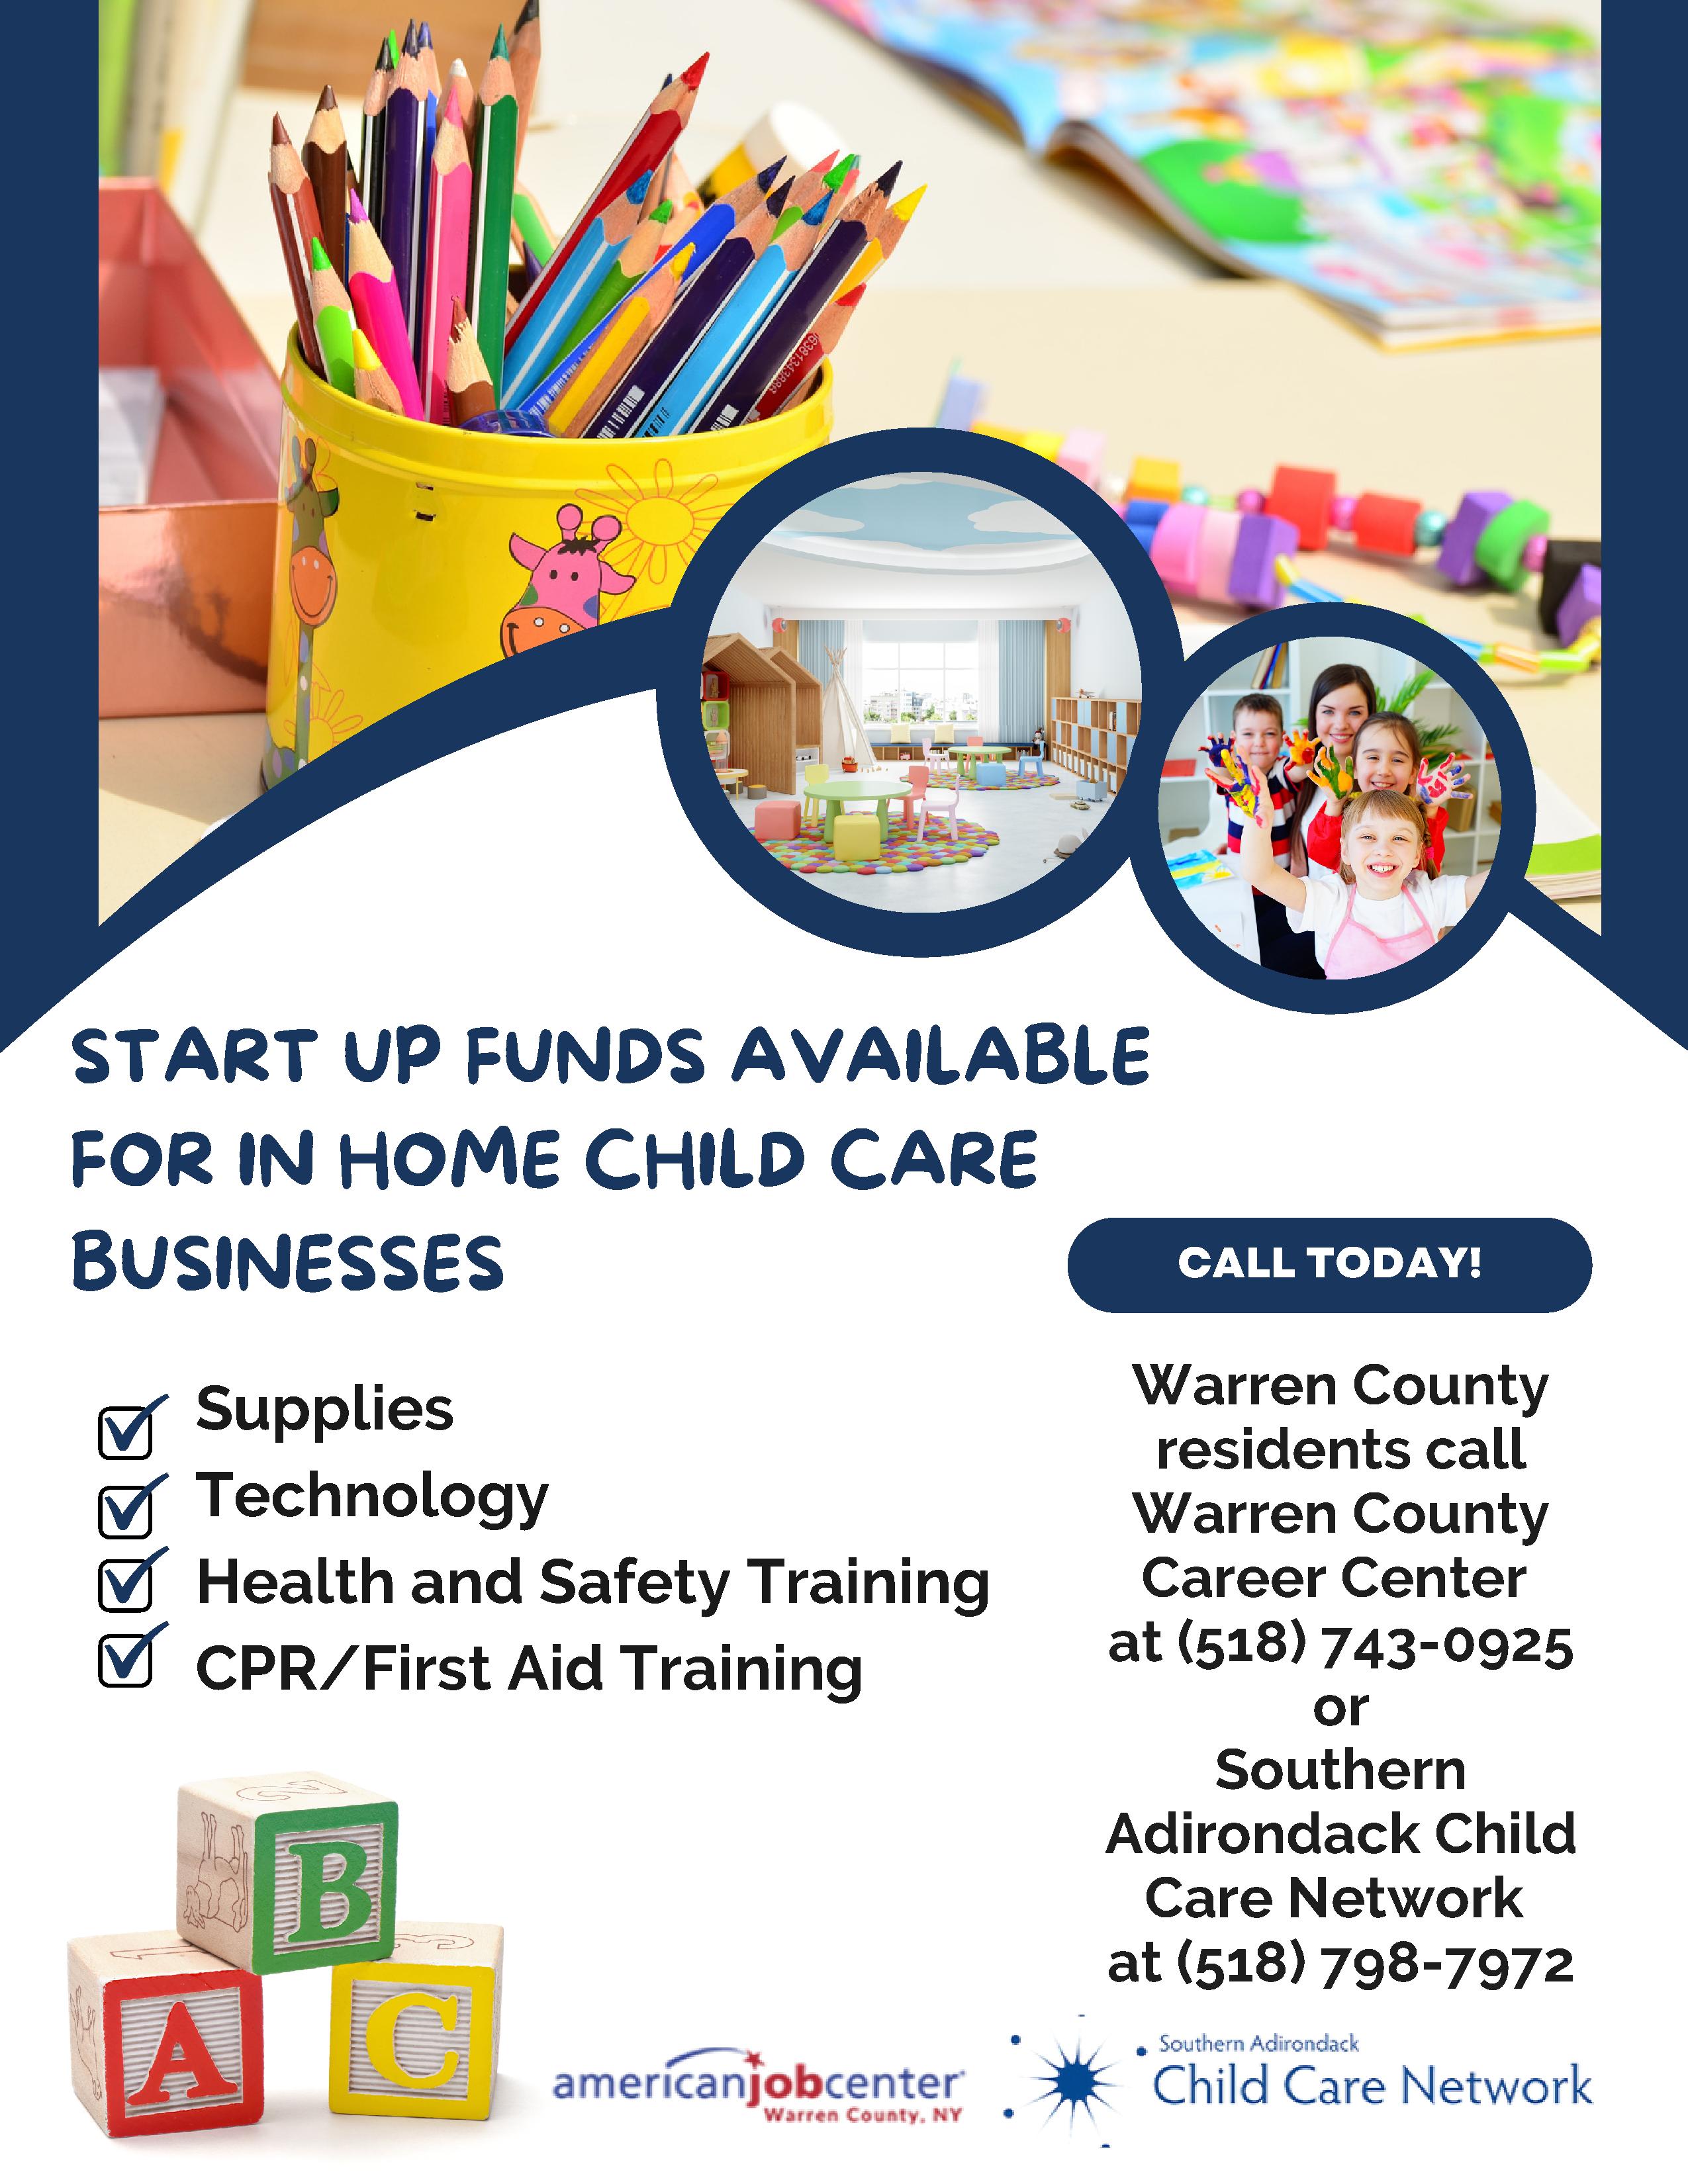 Flyer detailing use of money to start child care business